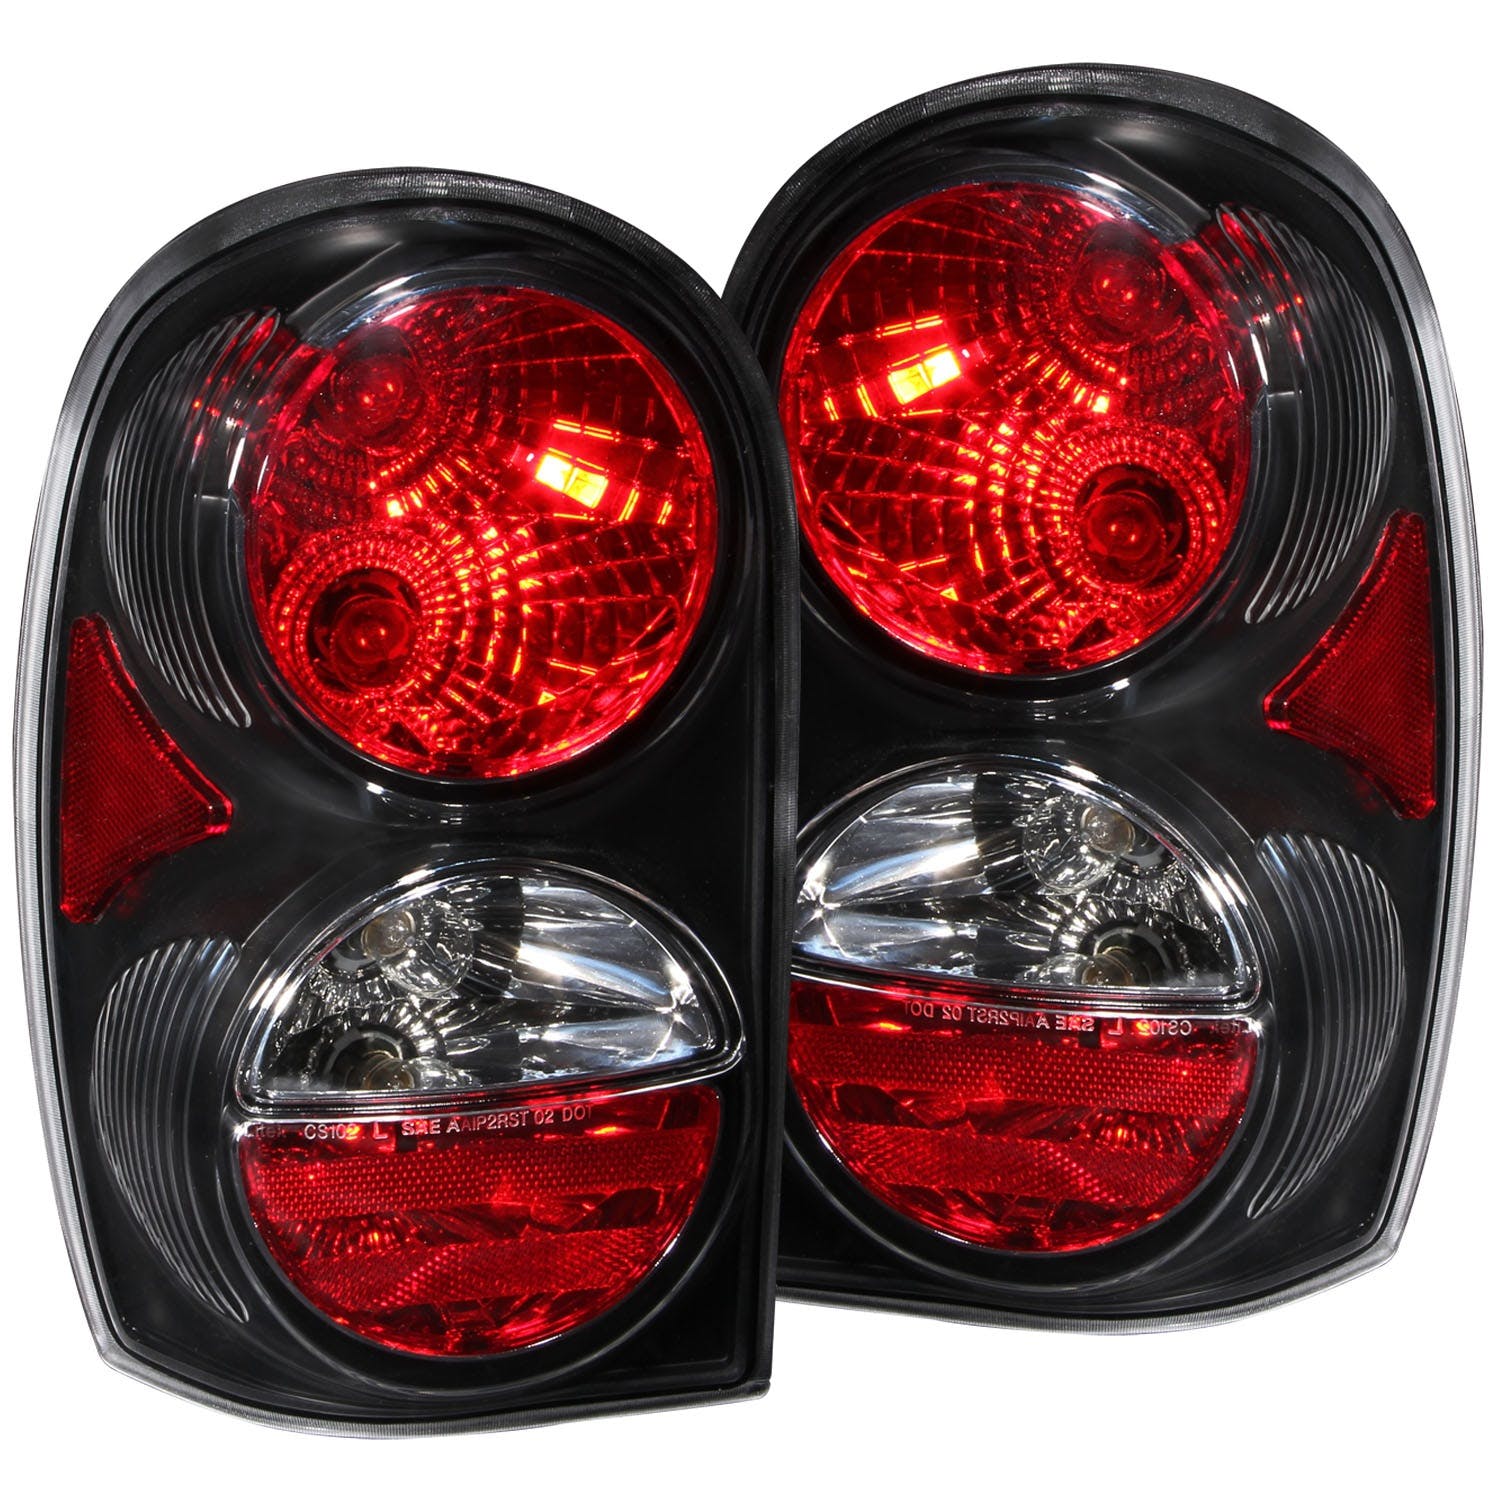 AnzoUSA 211108 Taillights Black